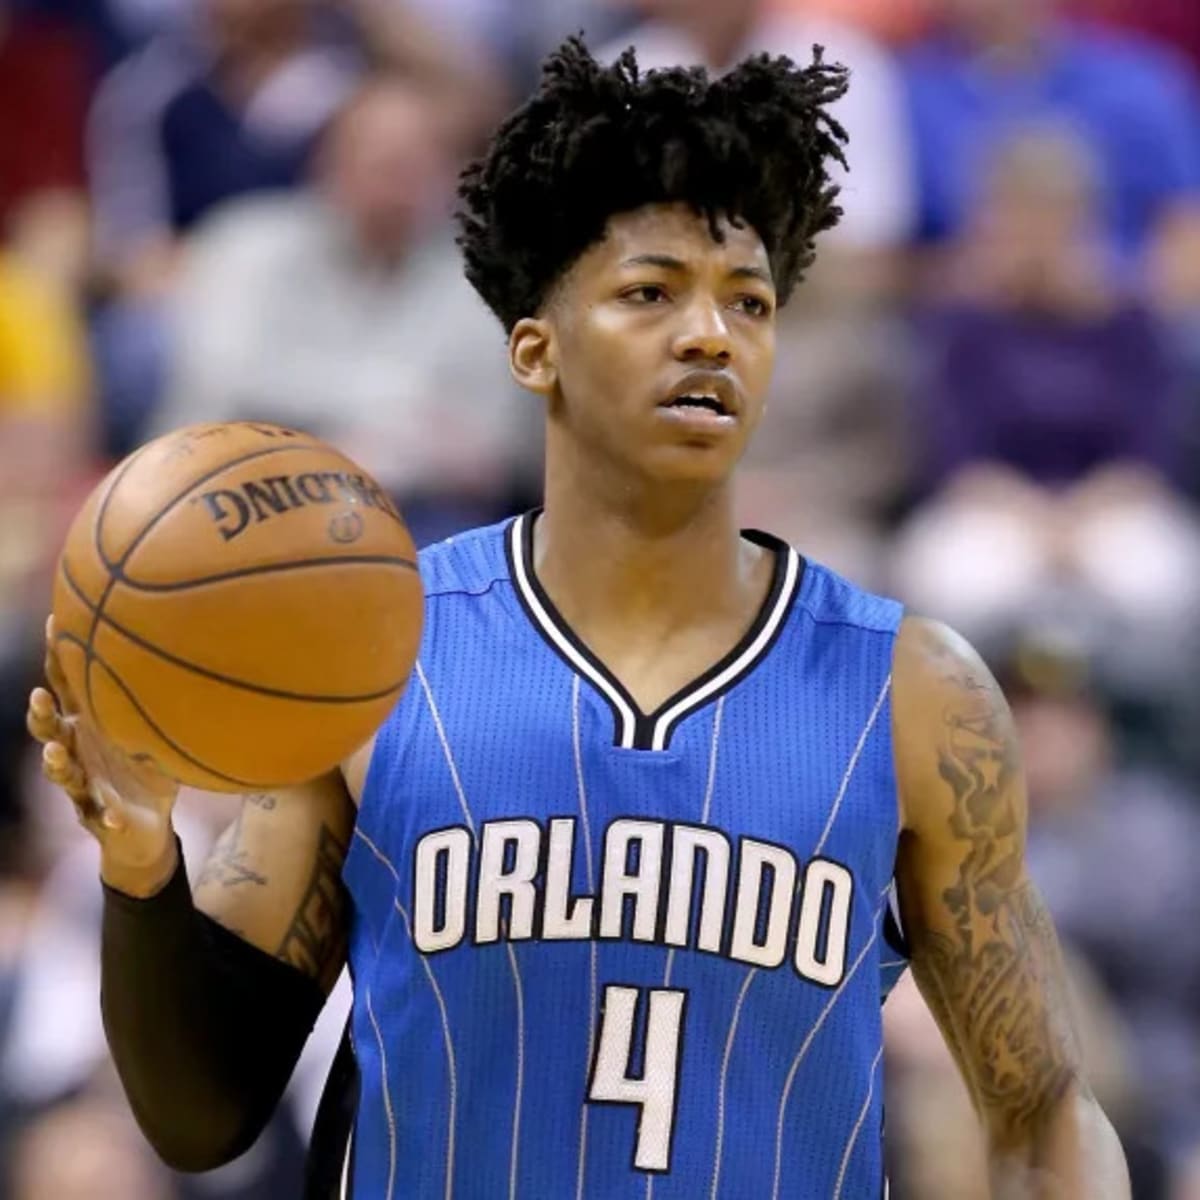 Elfrid Payton has been a mixed bag of results halfway through his